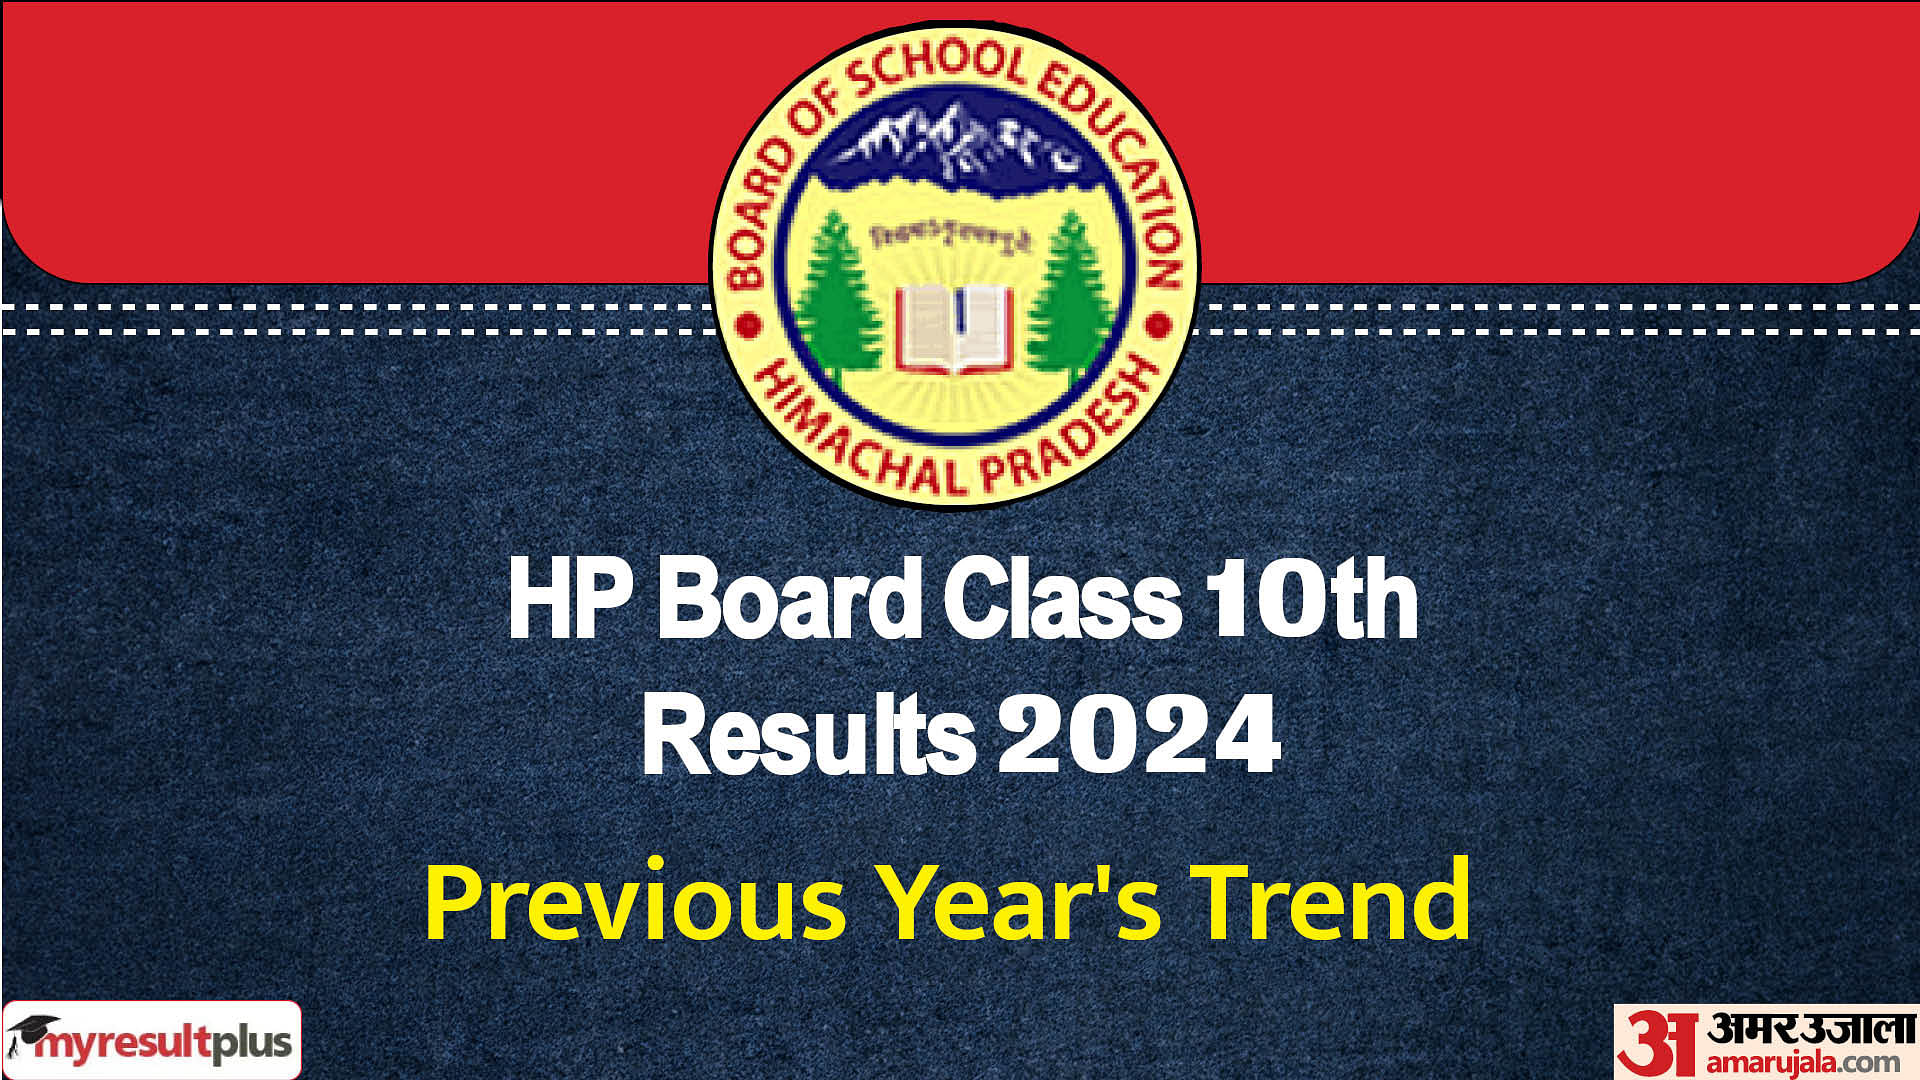 HPBOSE 10th Result 2024 releasing soon, Read about the past year's trend here